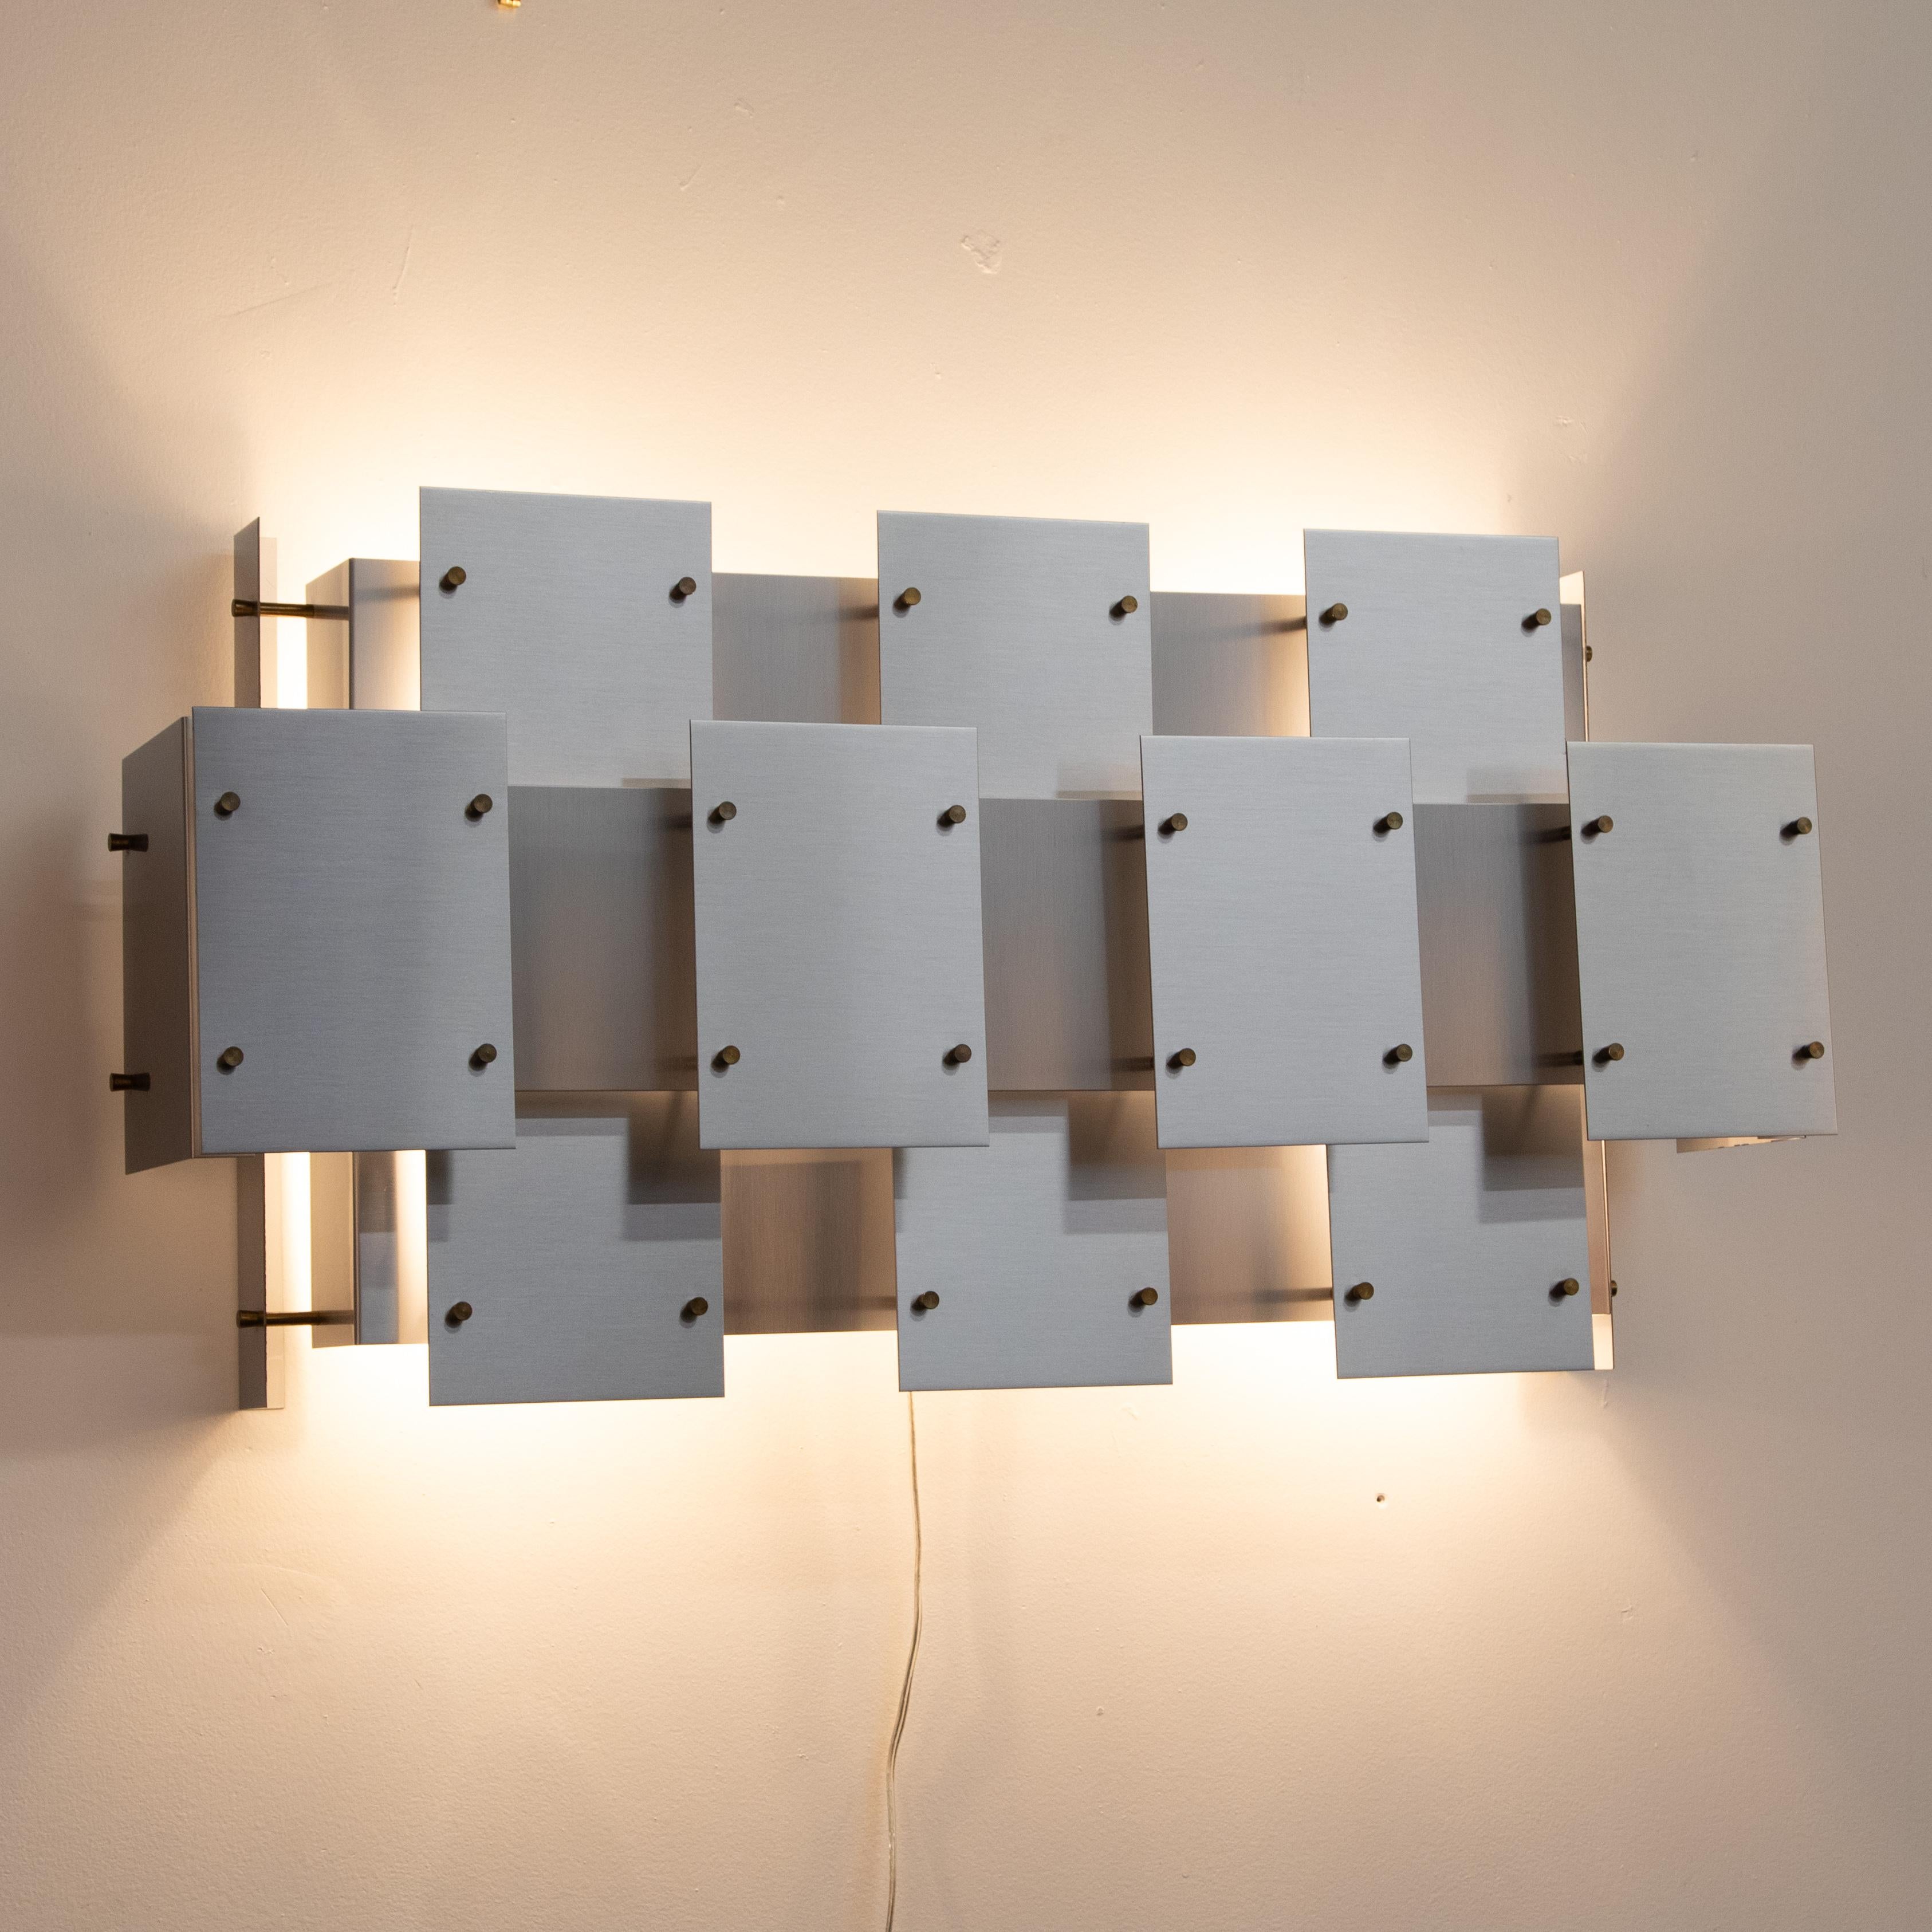 This interlocking geometric wall sconce features brushed-steel tiles secured with brass fittings. The layers of tiles cover the bulbs completely, and spacing between the tiles allows for soft, indirect light. Porcelain sockets hold four